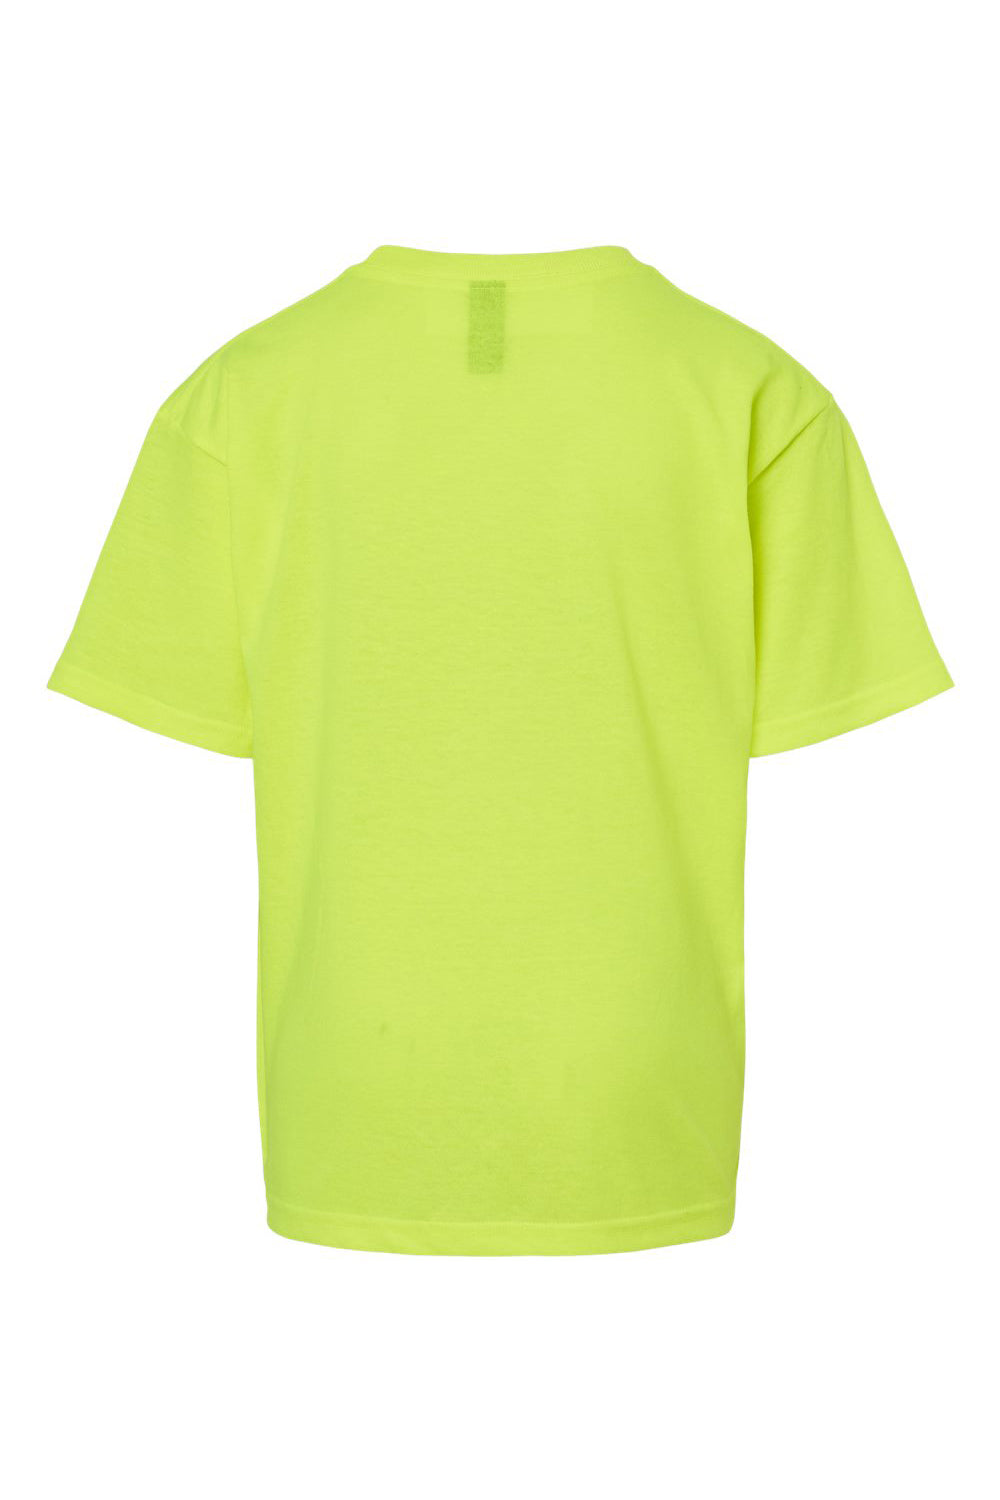 M&O 4850 Youth Gold Soft Touch Short Sleeve Crewneck T-Shirt Safety Green Flat Back